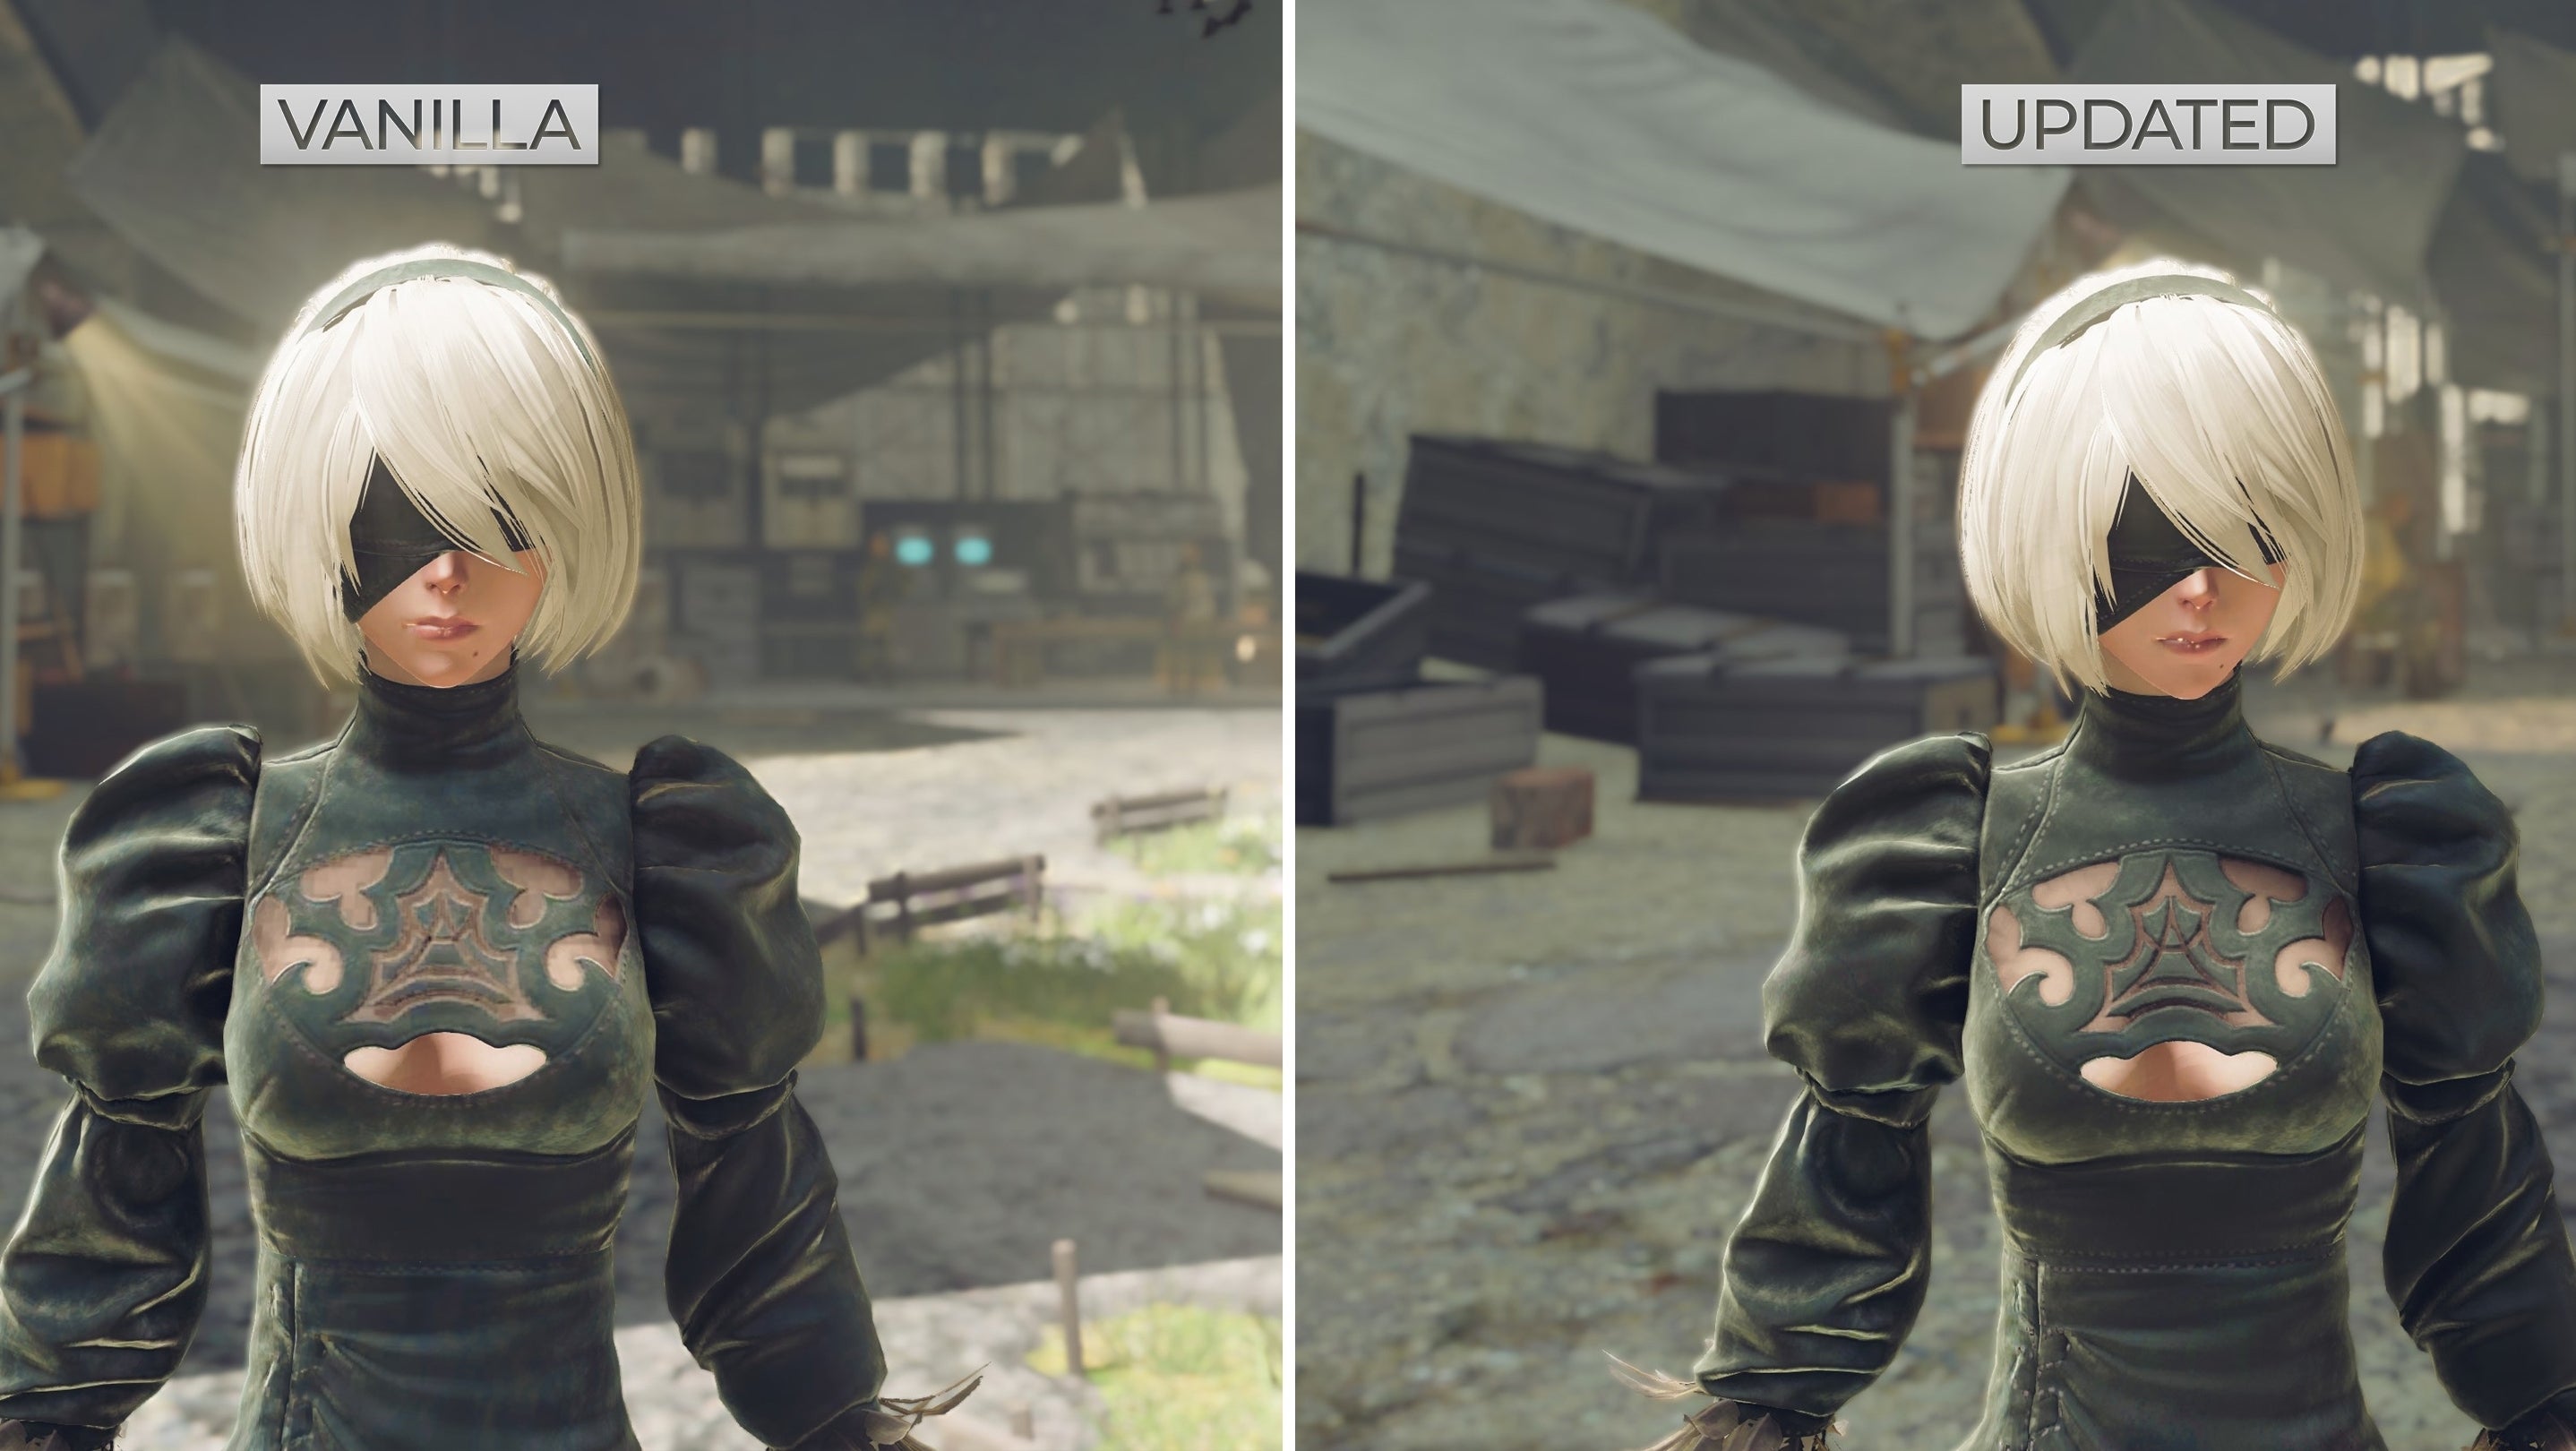 Image for Modder's Nier: Automata HD texture pack finally complete after four years of development